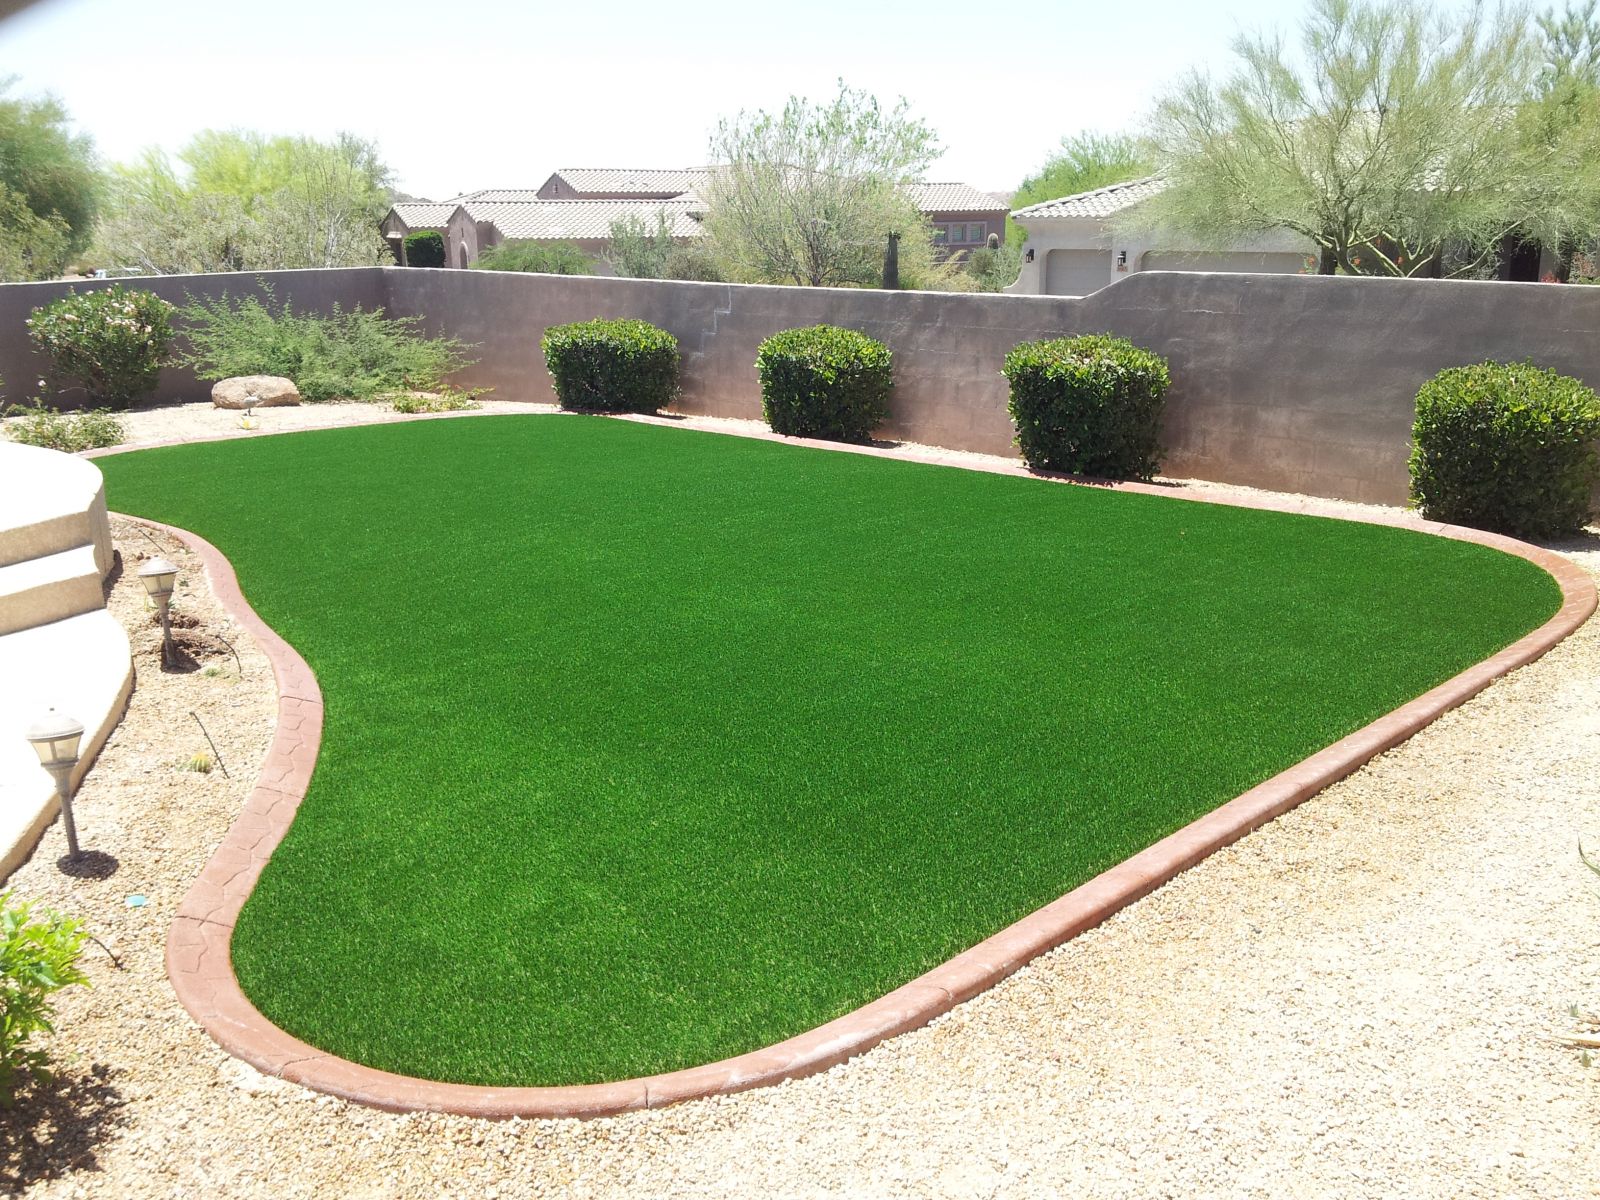 Transform Your Lawn with High-Quality Luxury Turf Artificial Grass